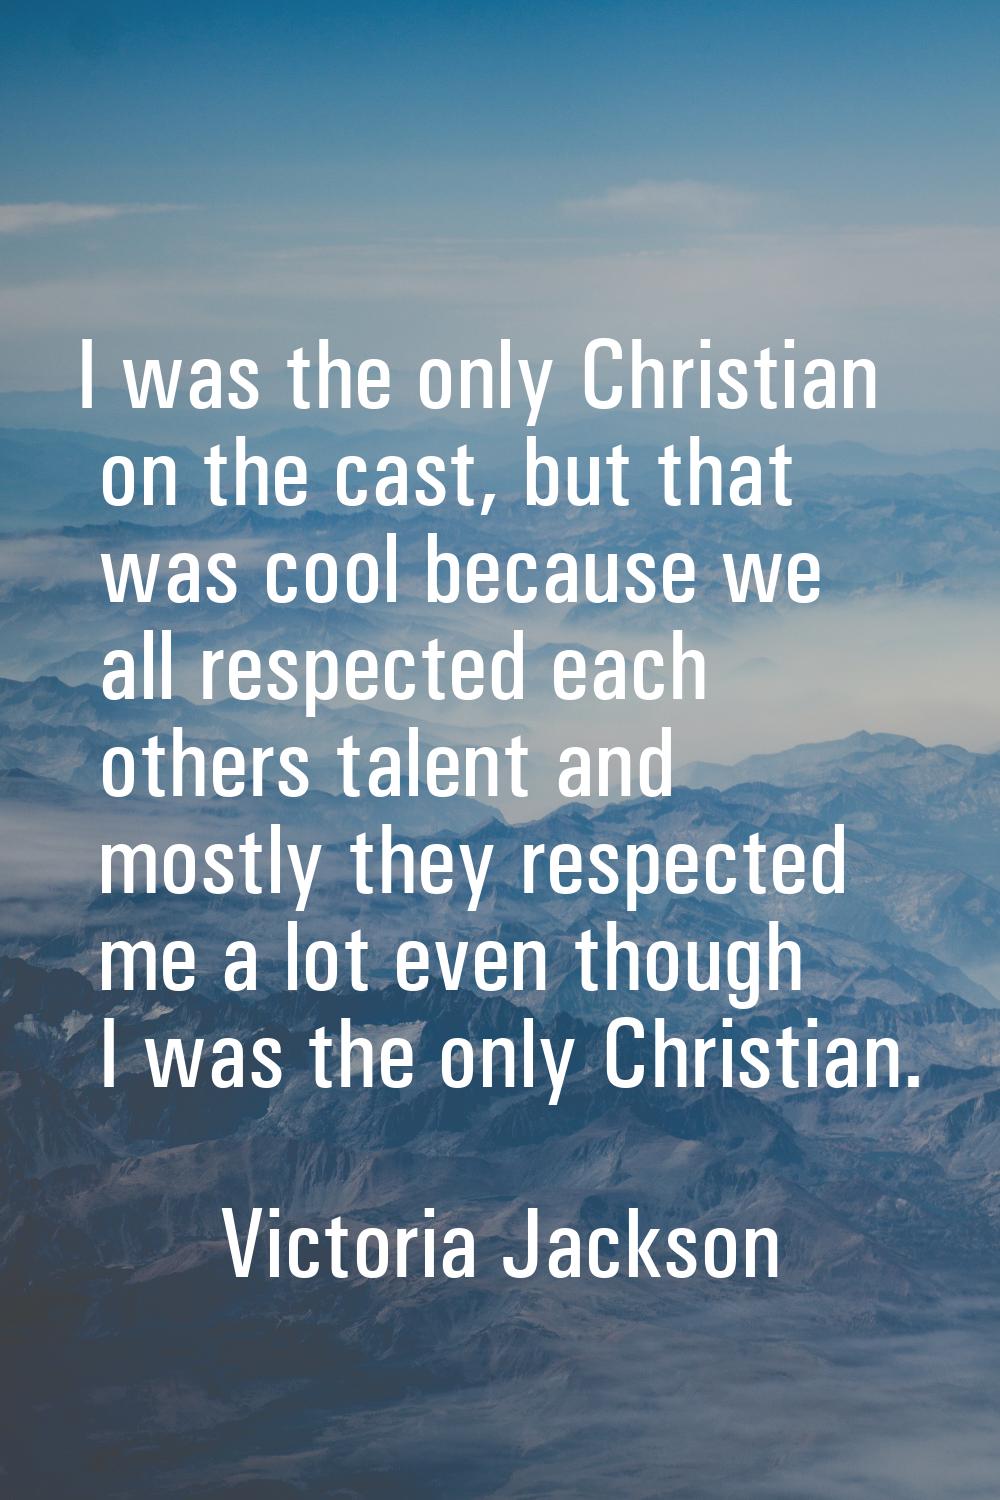 I was the only Christian on the cast, but that was cool because we all respected each others talent